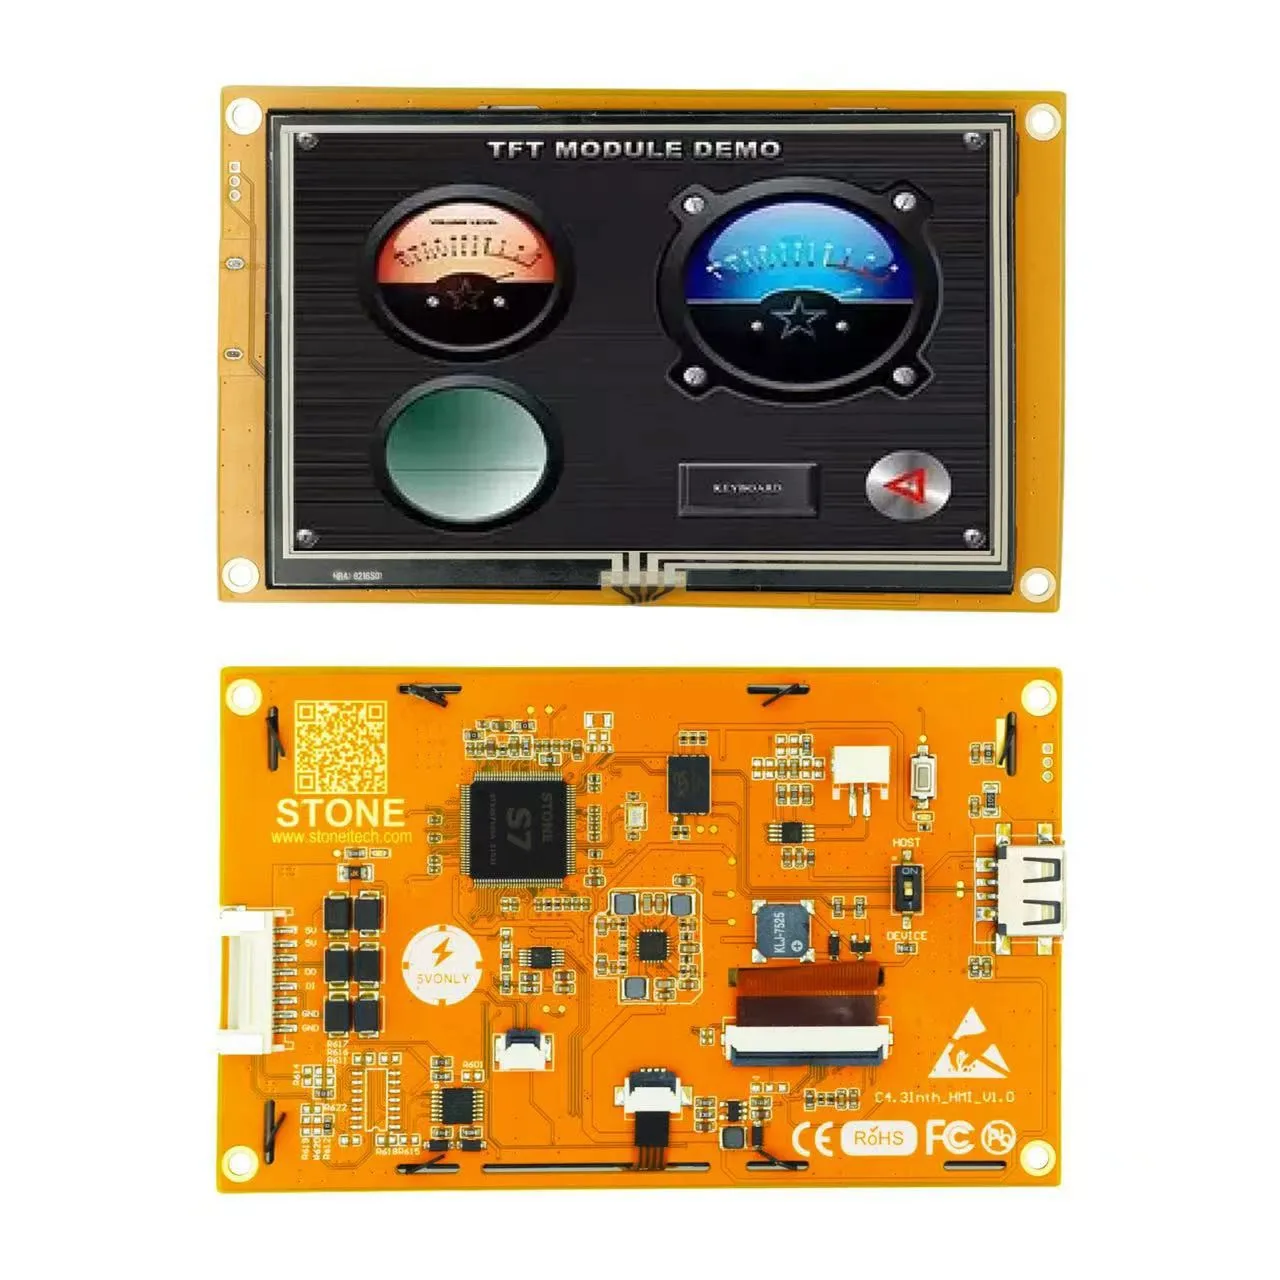 STONE HMI Civil Series LCD Display 4.3'' Size 262K Full Color 1GHz CPU/128M Flash UART Port Touch Display